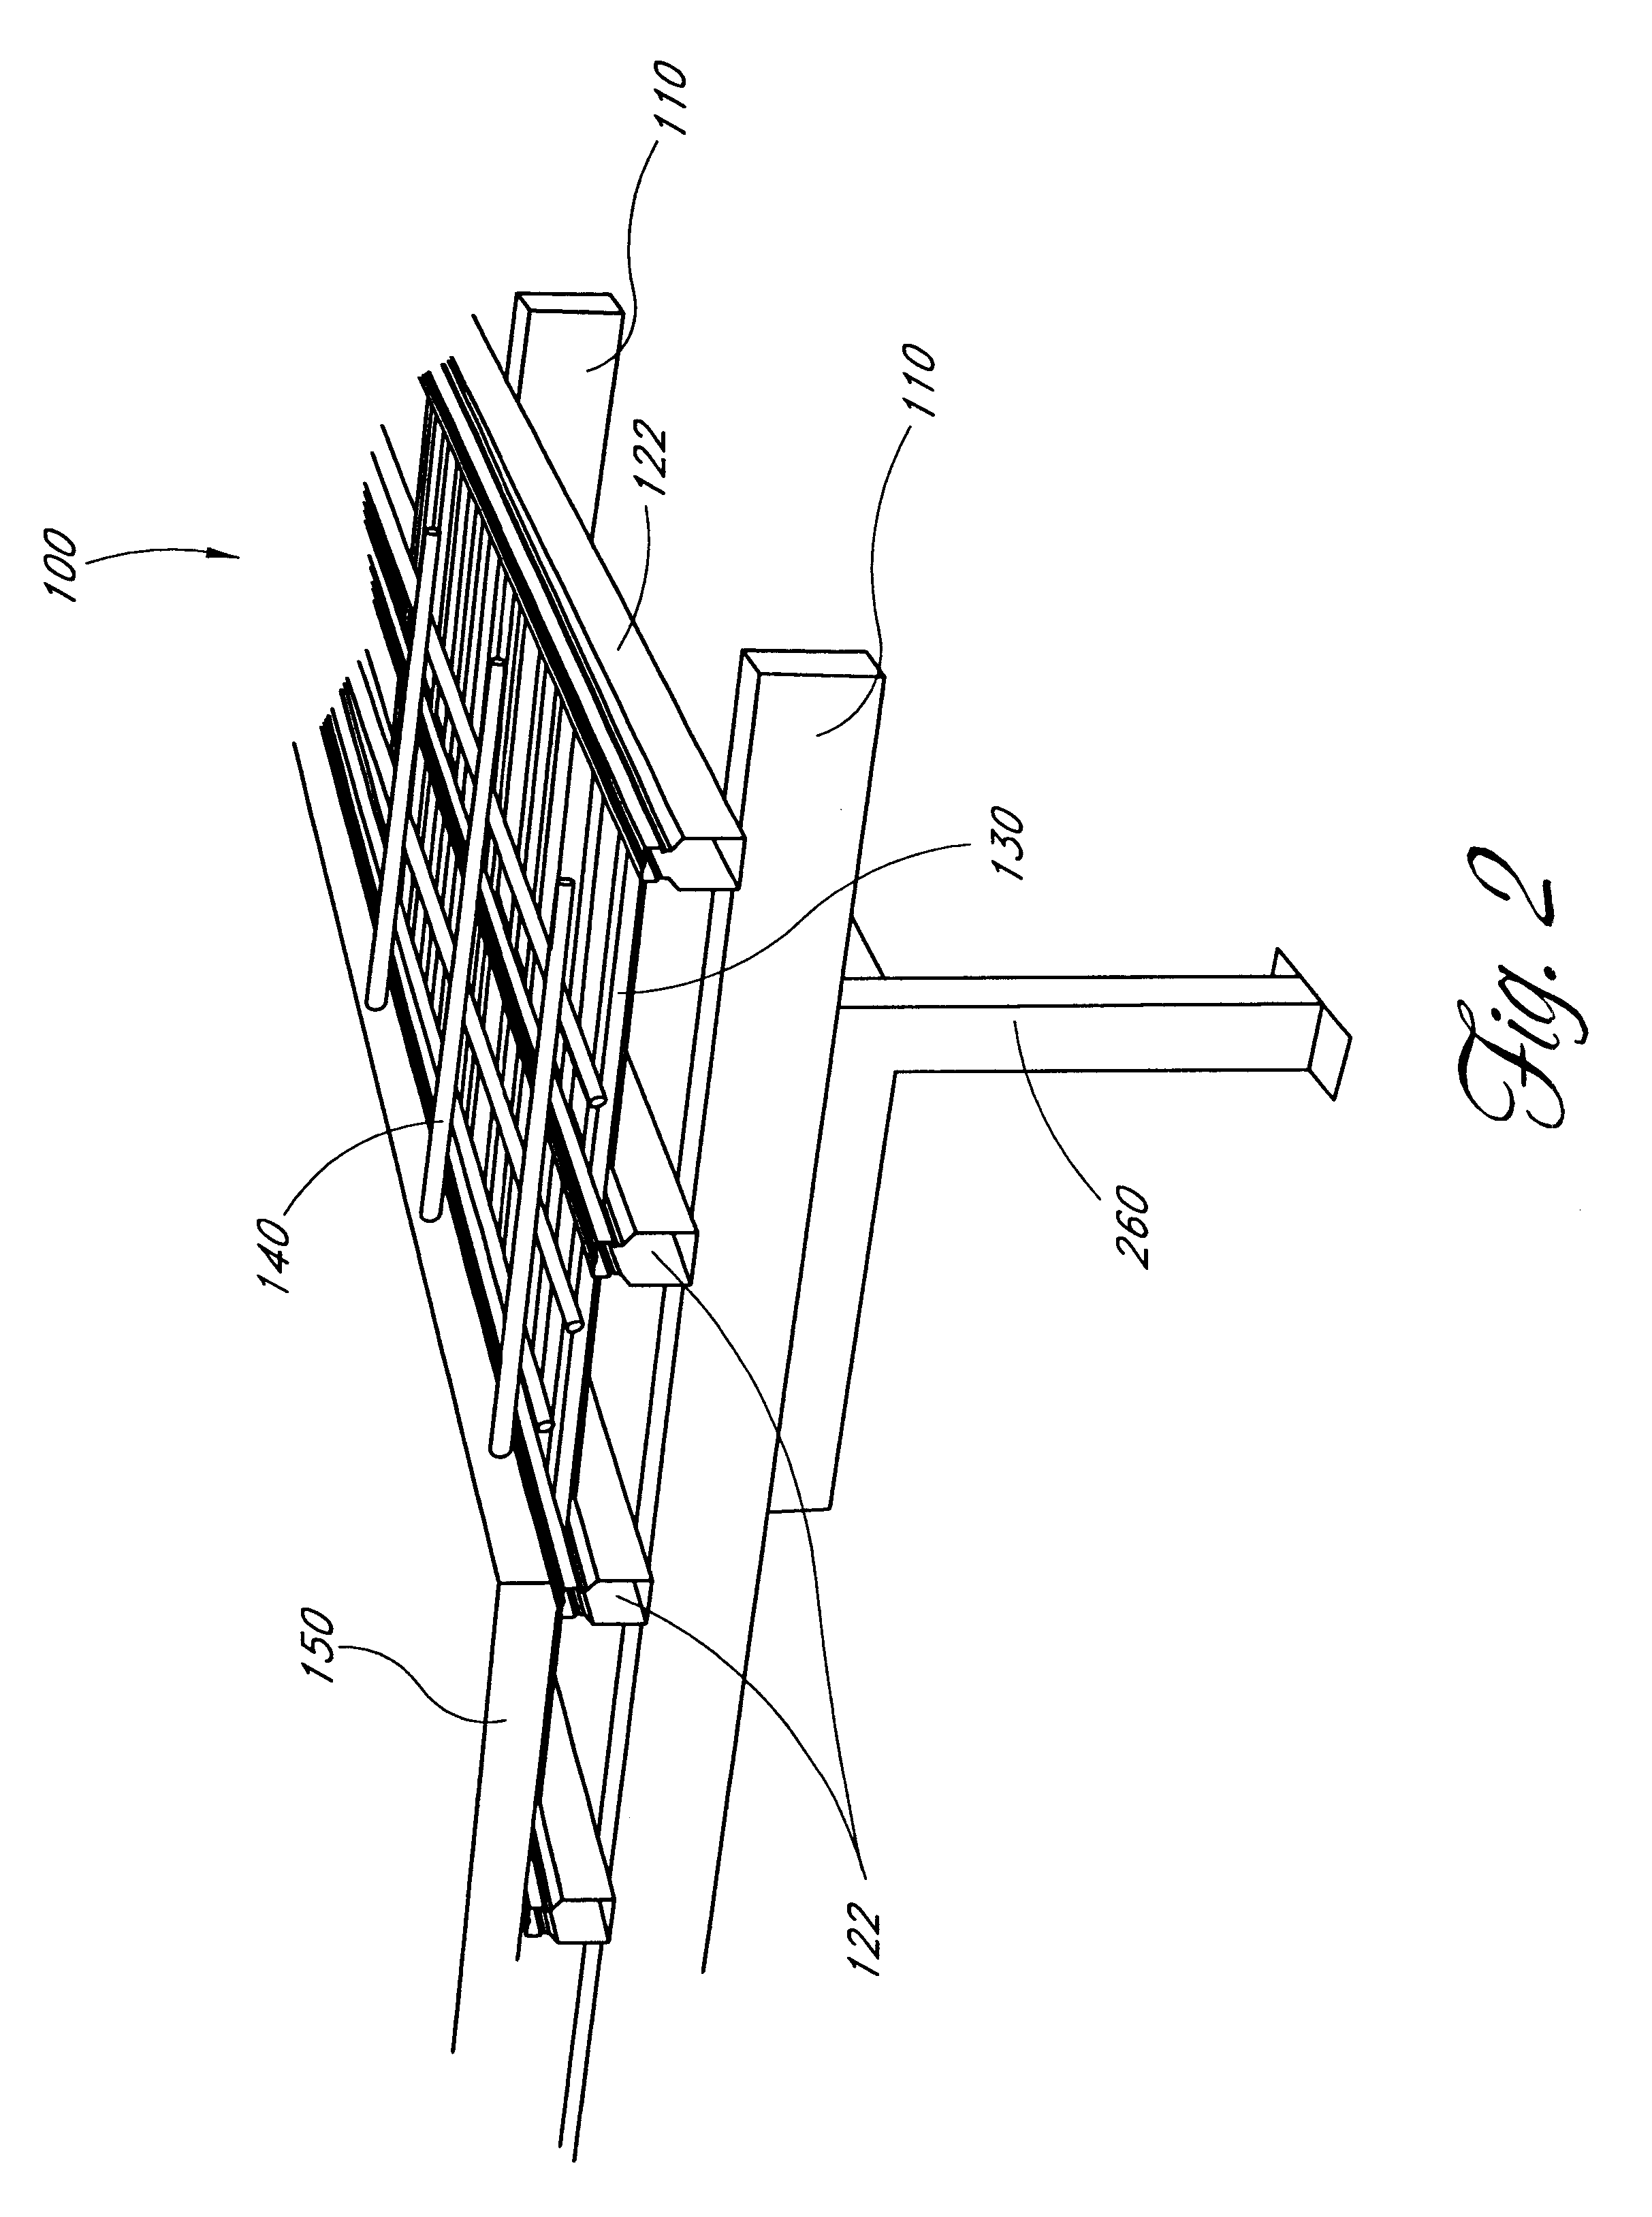 Suspended concrete flooring system and method